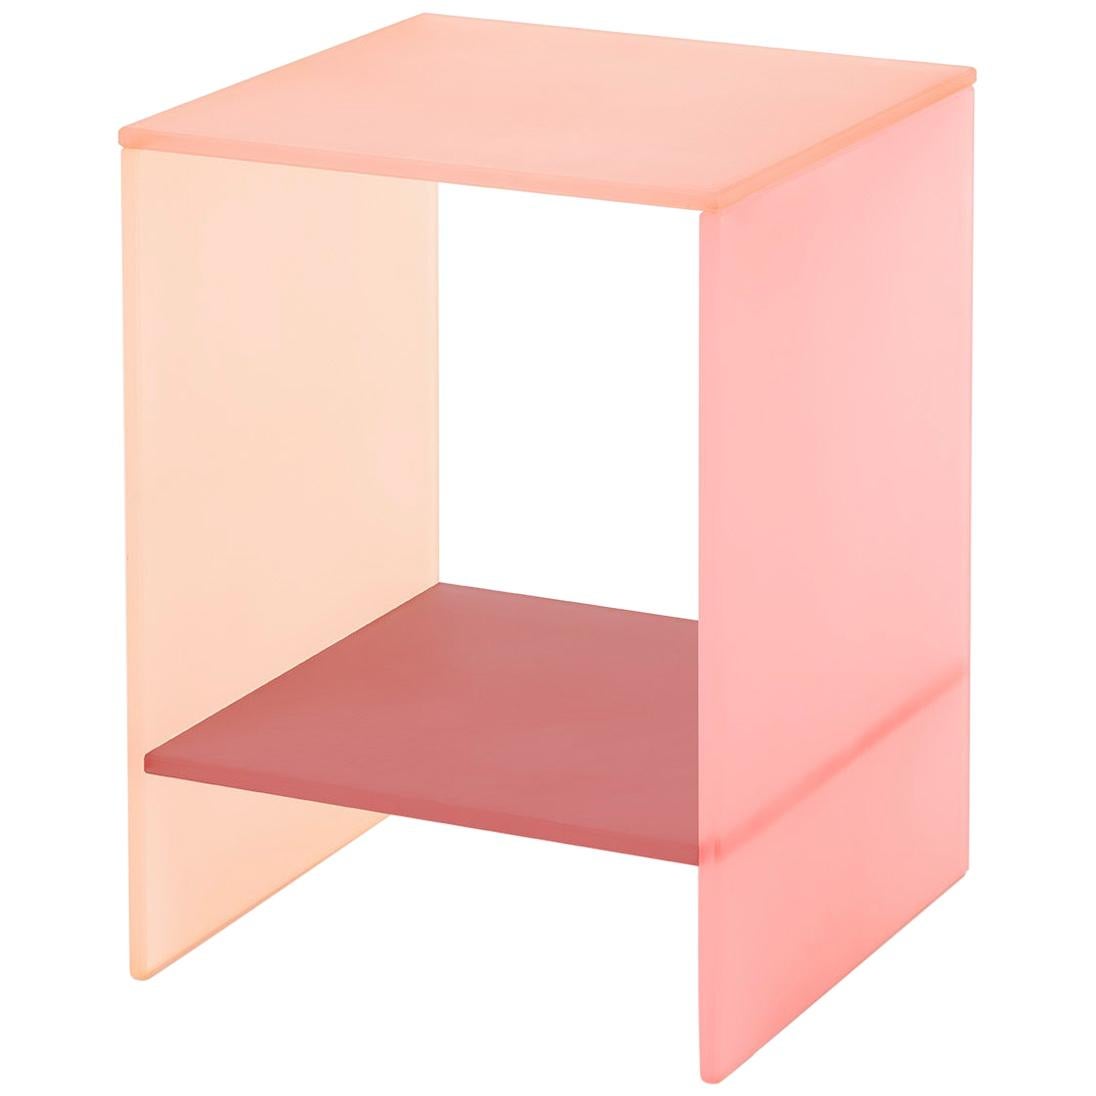 Translucent Pastel Hand-Dyed Acrylic Tone Table by Sohyun Yun, Pink Tone